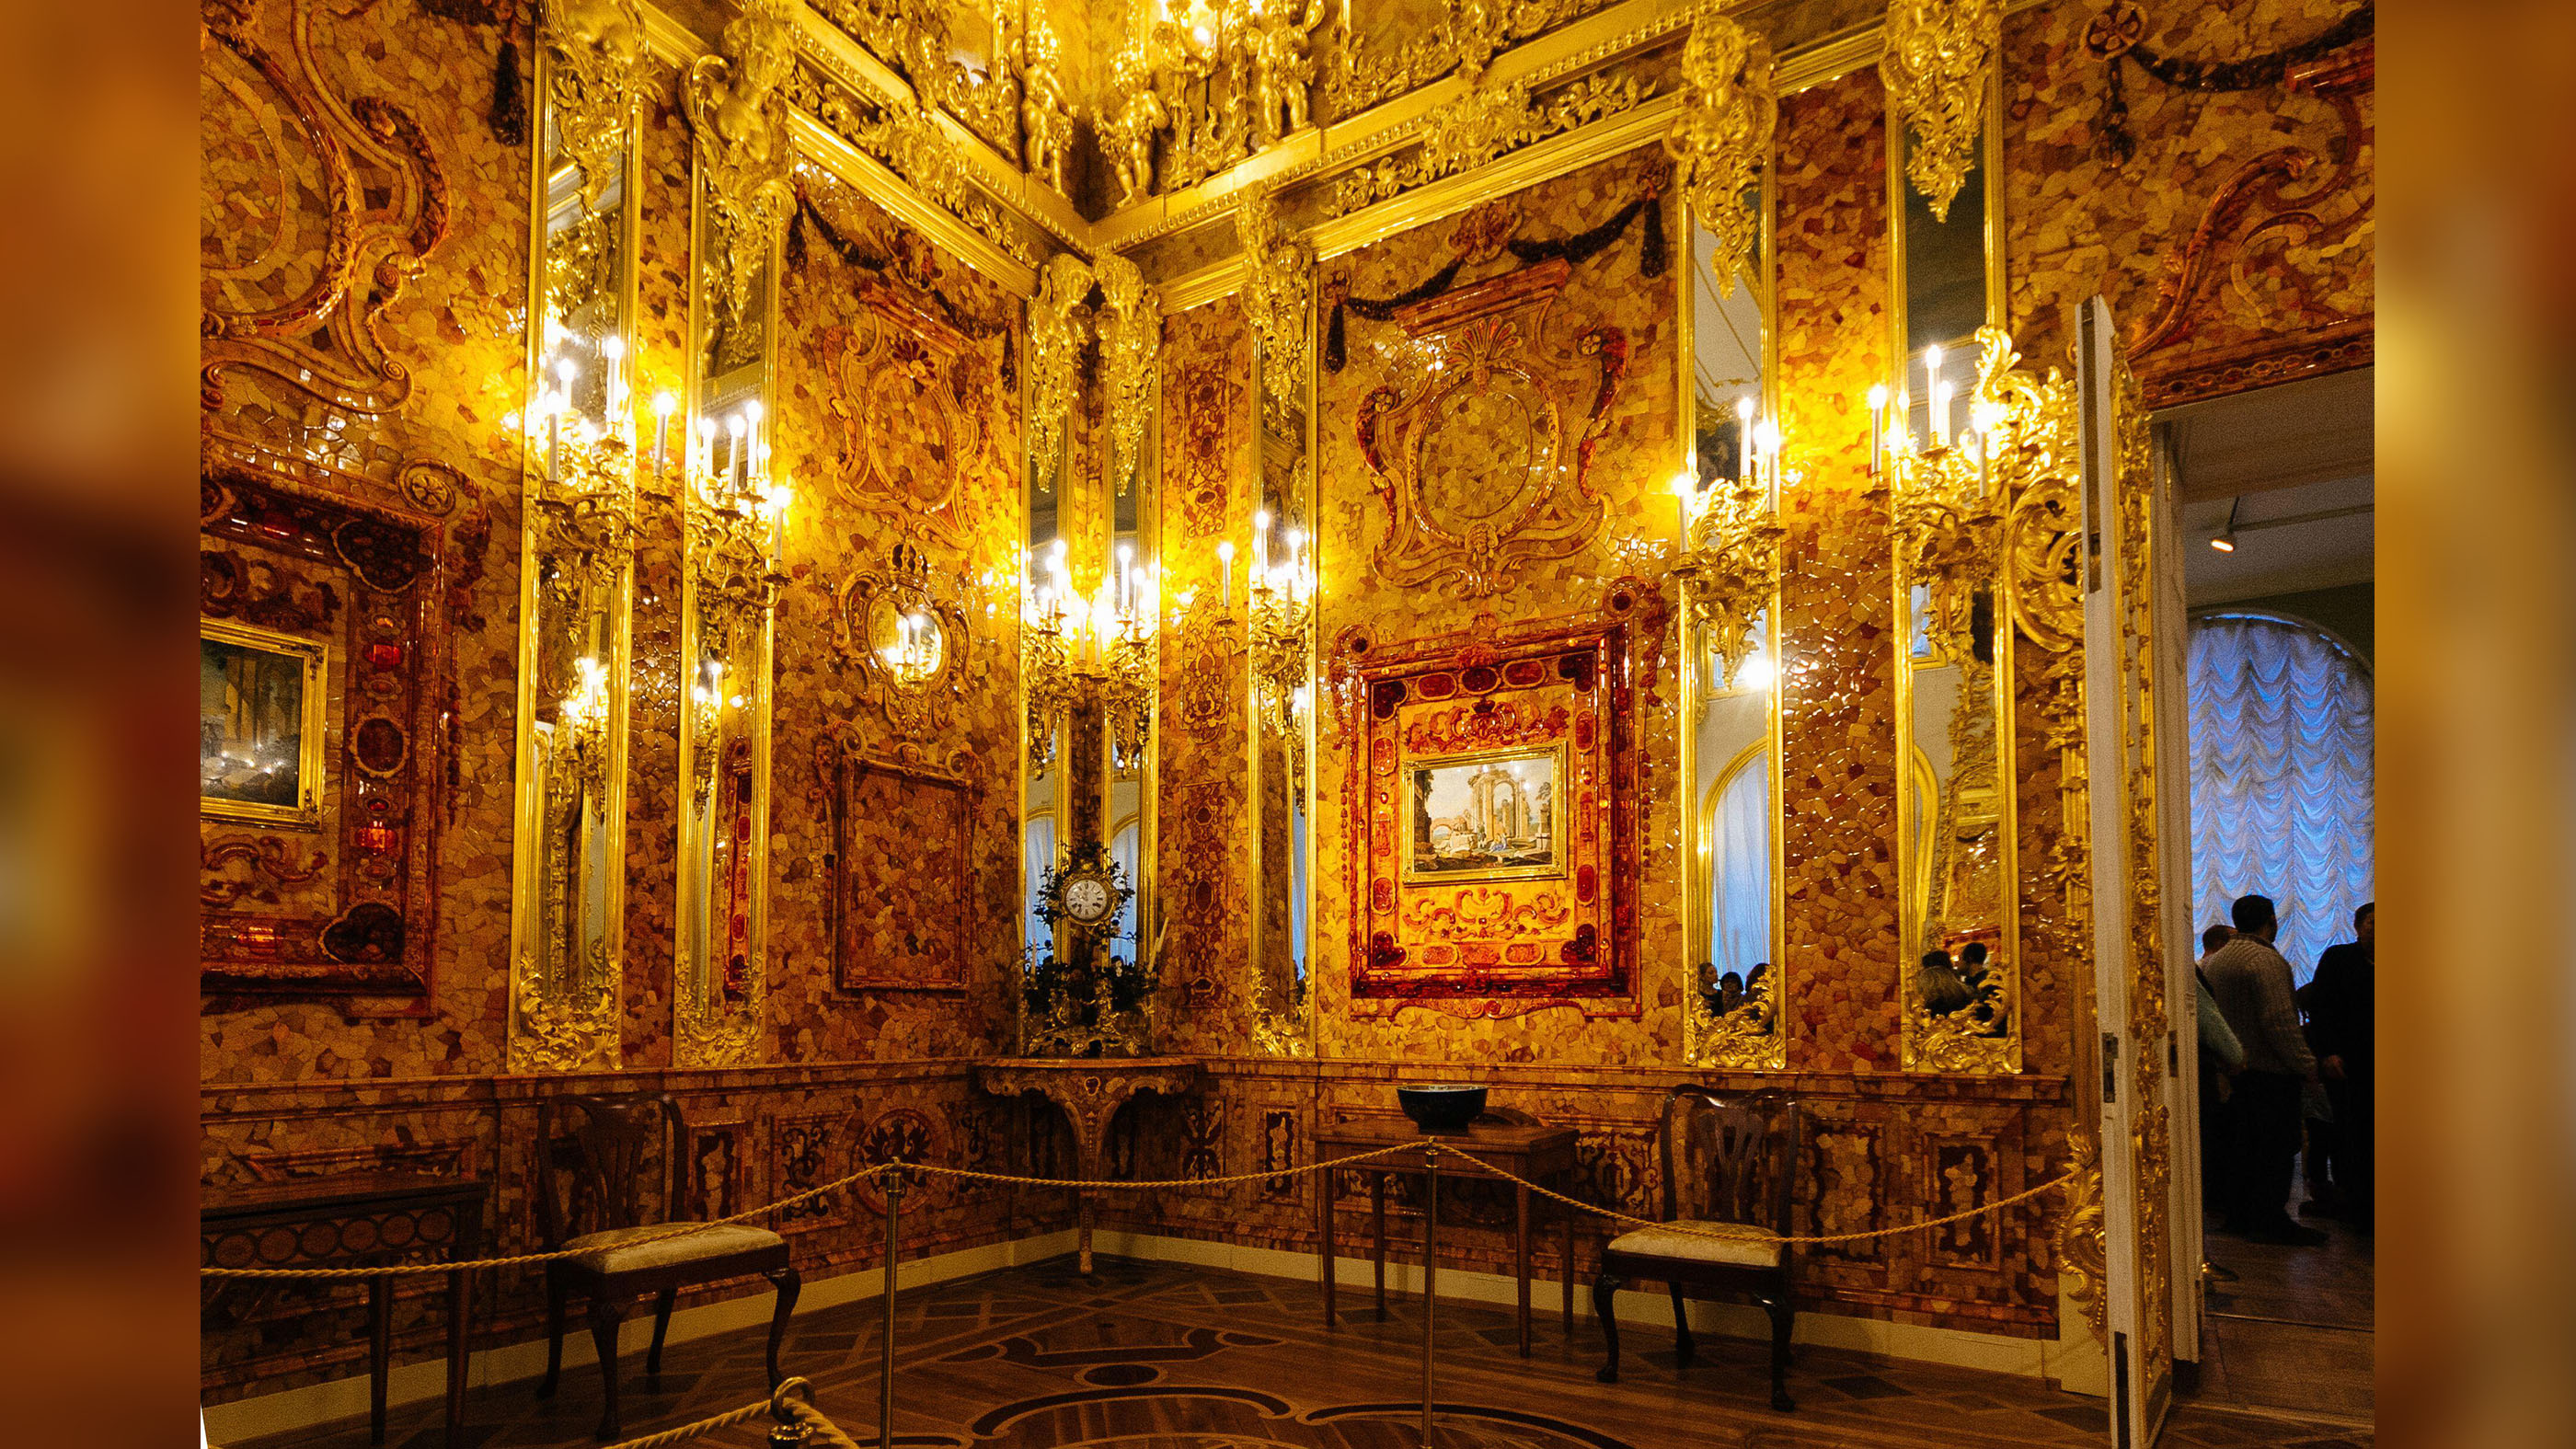 The interior of the Amber Room glistens in St. Petersburg, Russia.